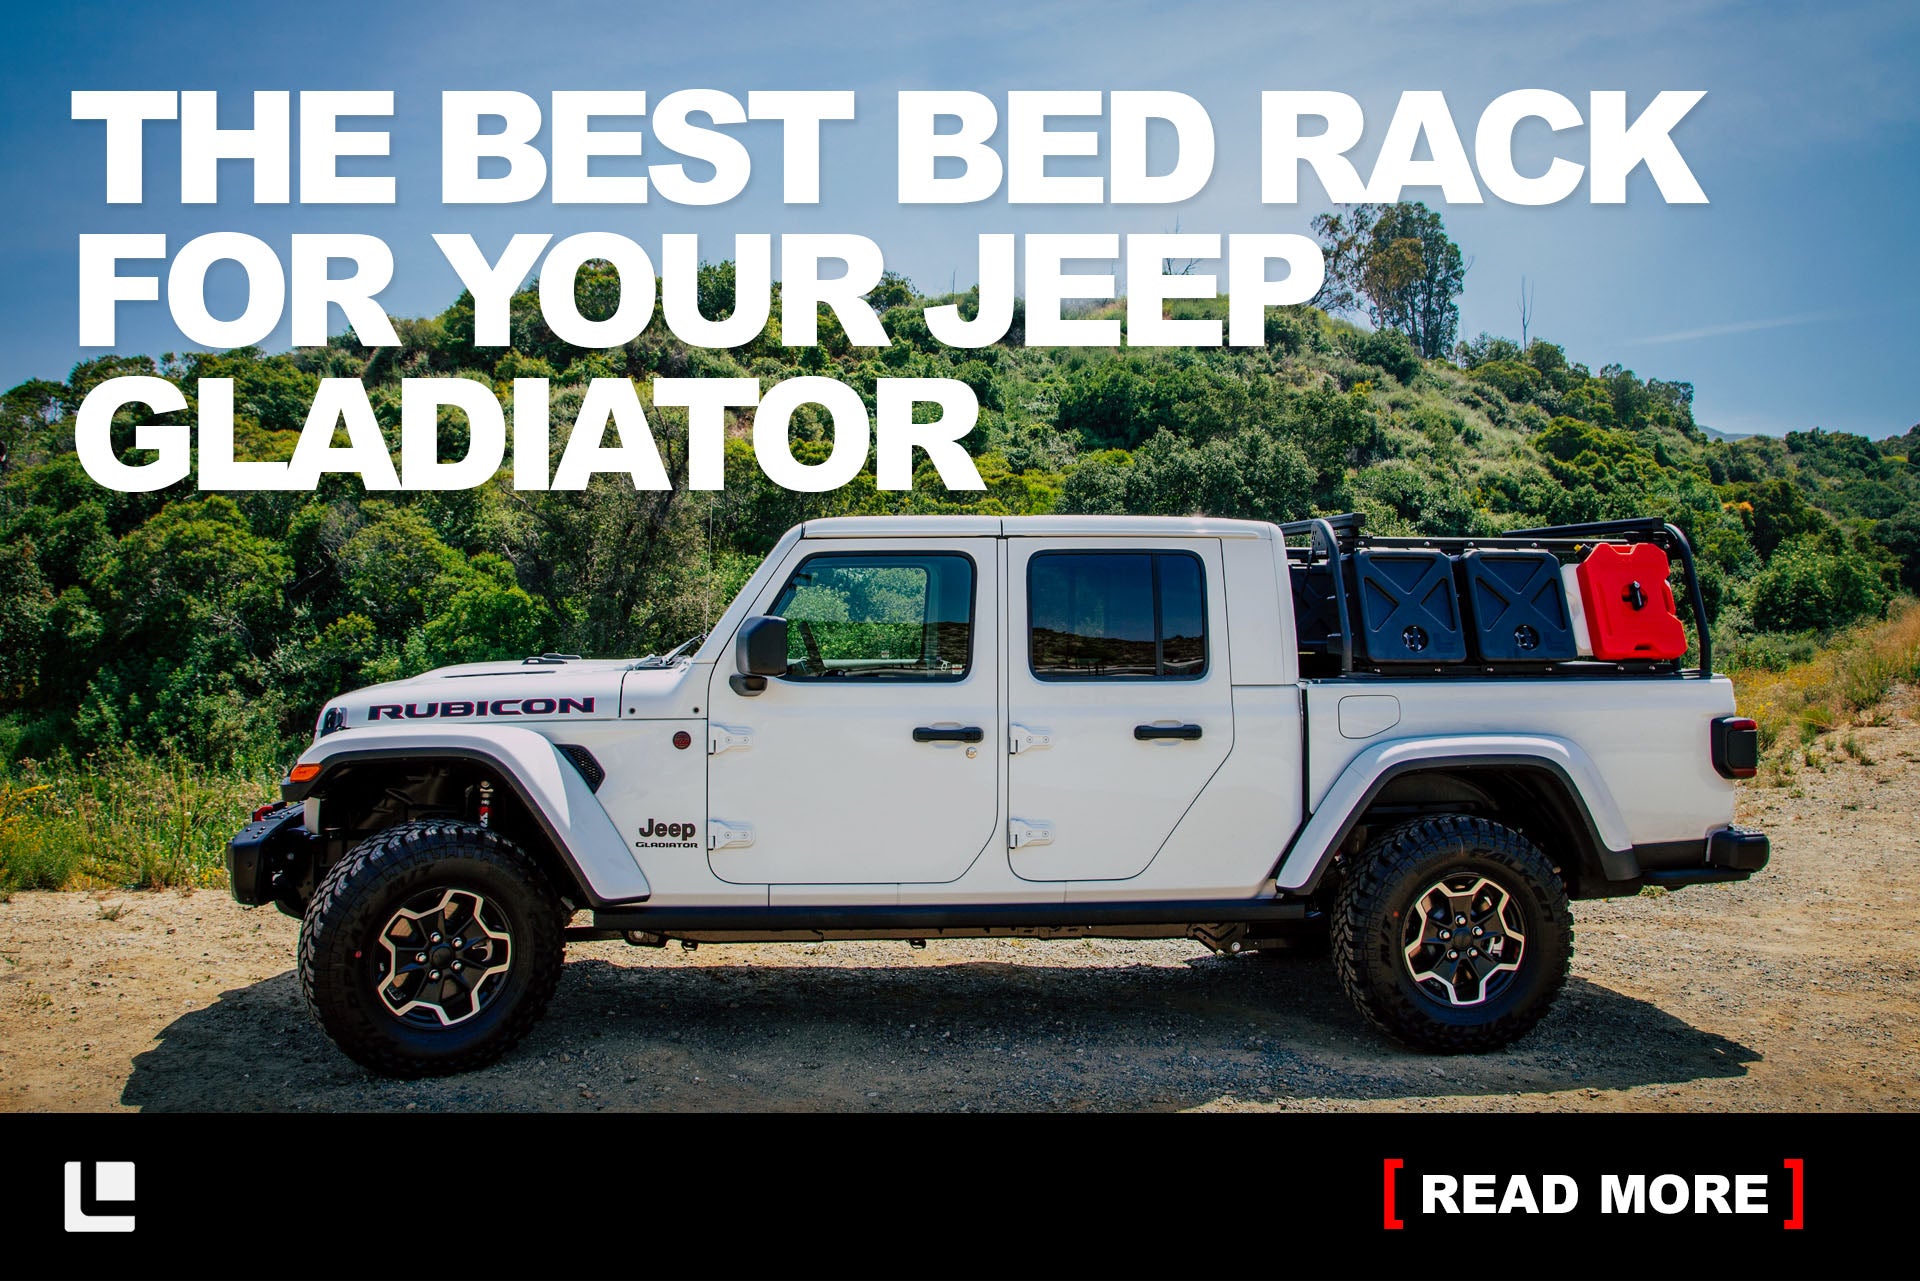 The Best Bed Rack For Your Jeep Gladiator